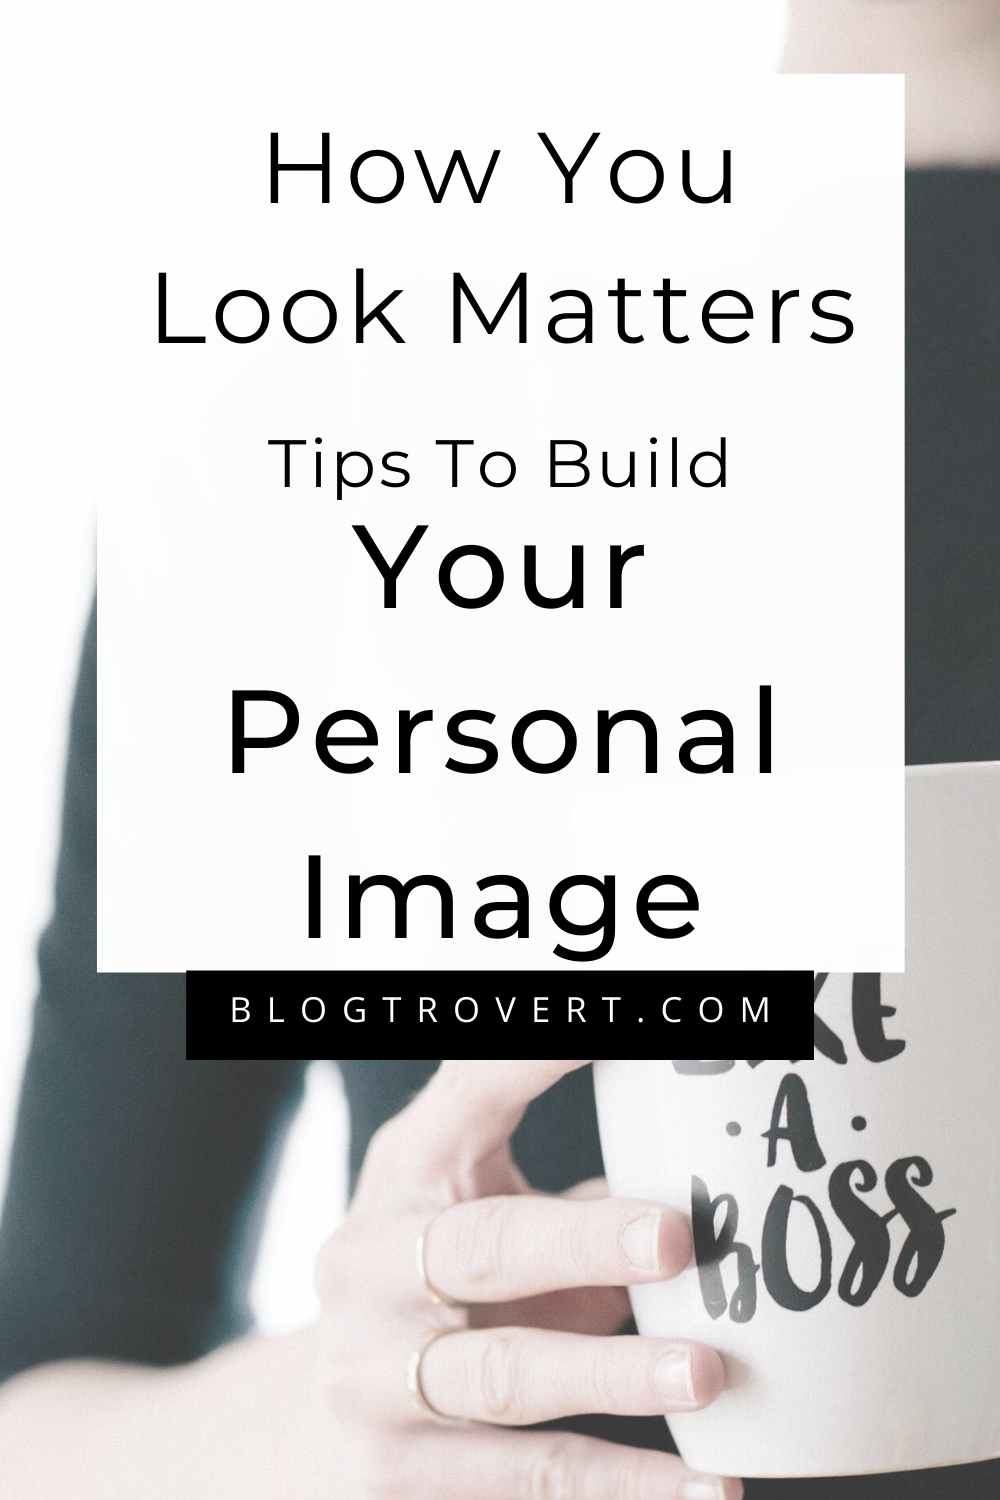 How To Build Your Personal Image; 6 Helpful Steps 3